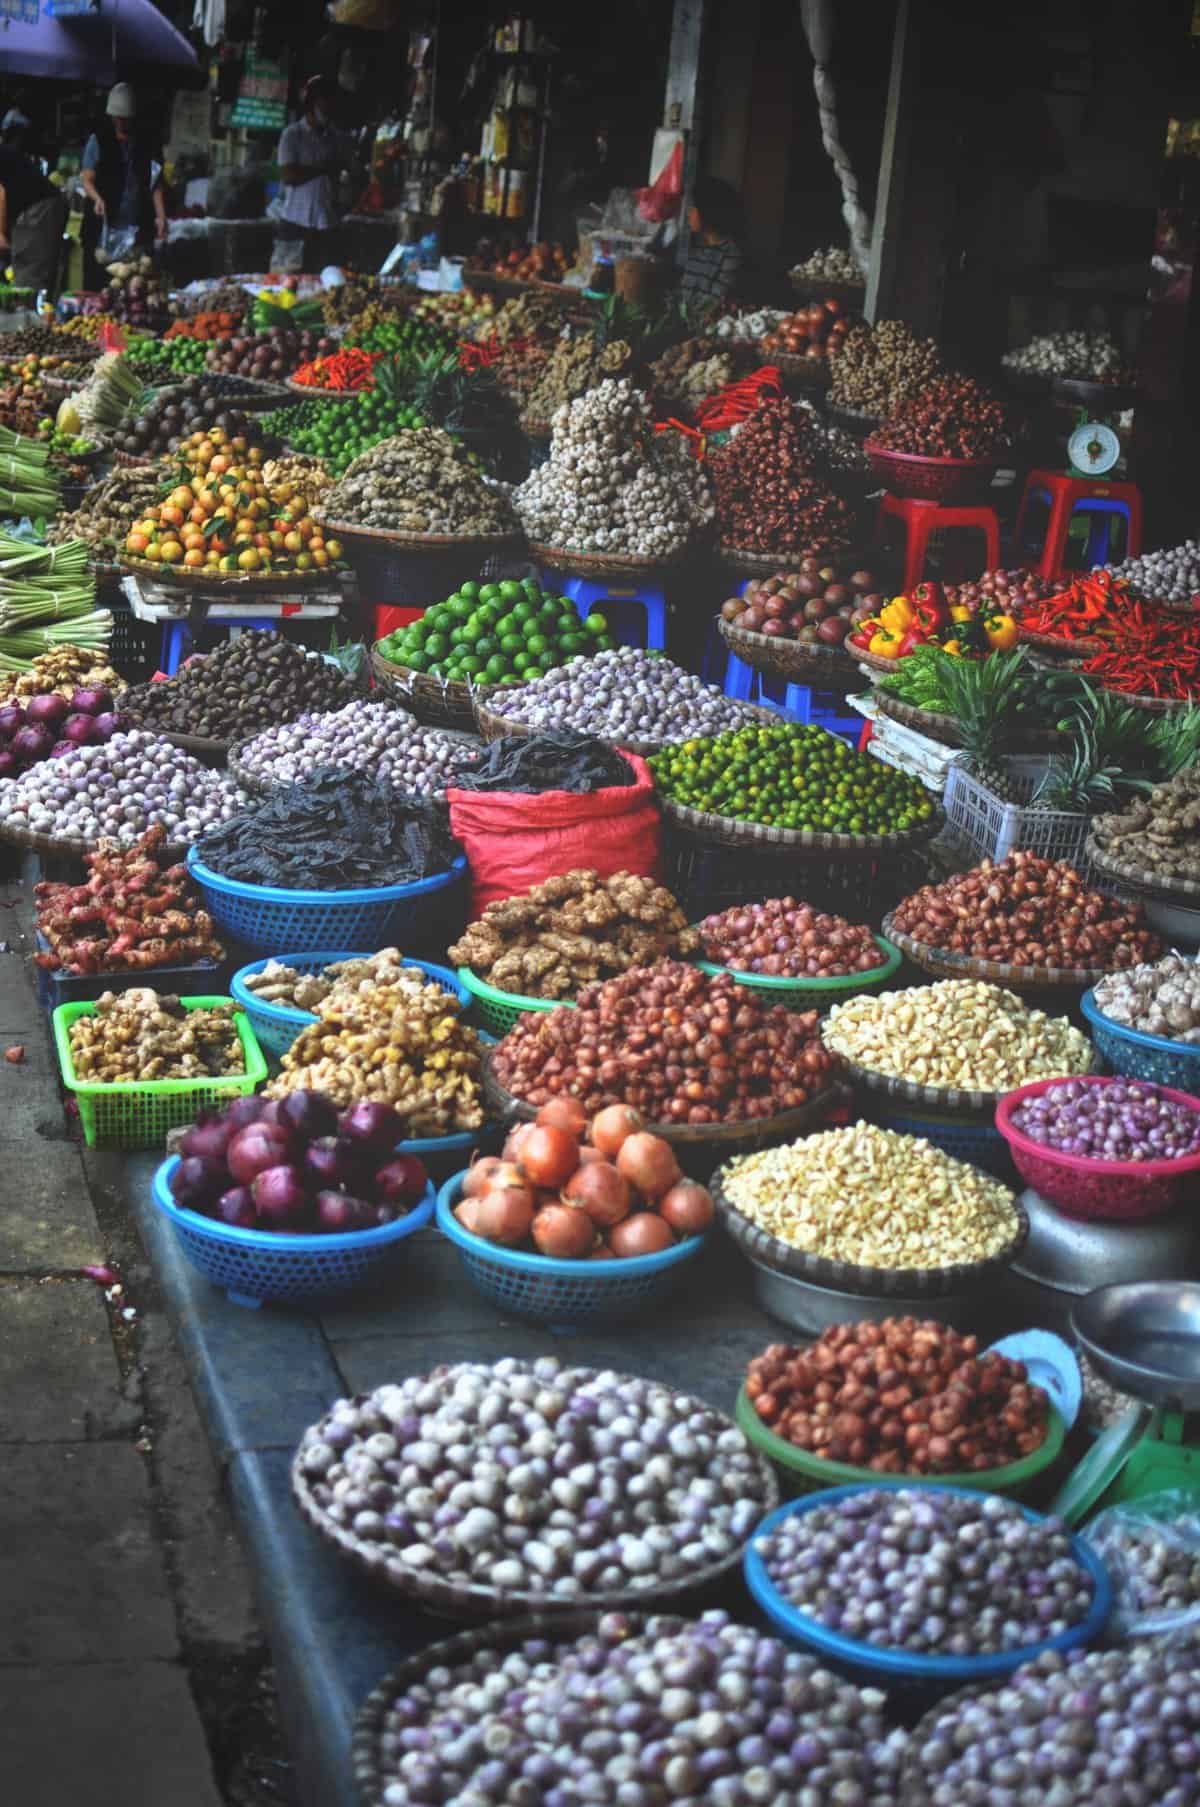 A fresh market on the streets of Hanoi, Vietnam featuring fruit, vegetables and endless food